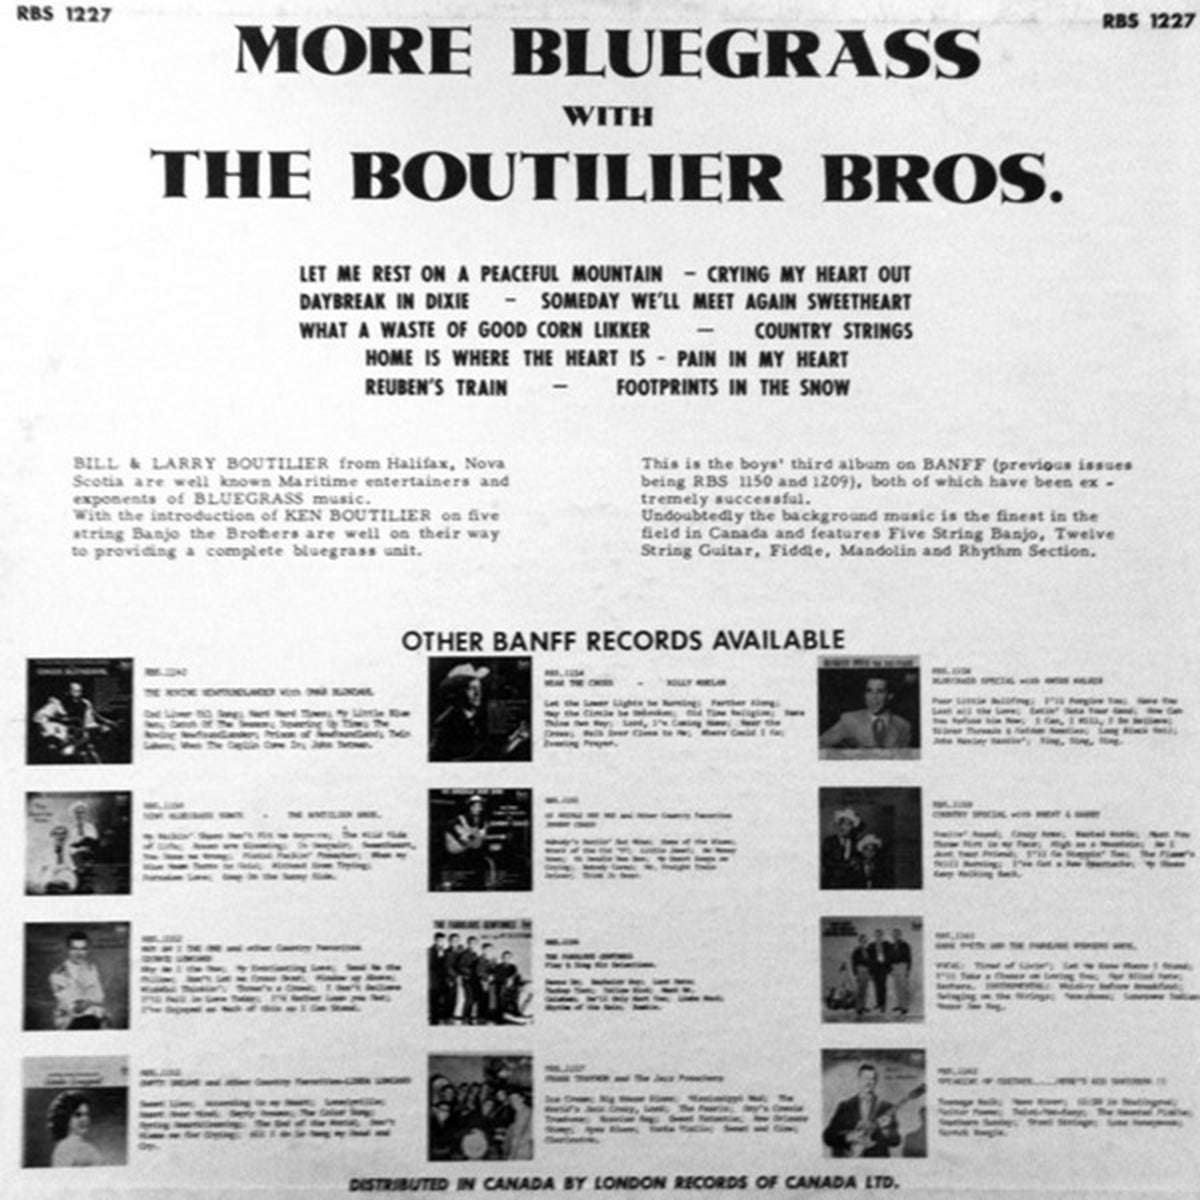 The Boutilier Brothers – More Bluegrass With The Boutilier Bros.